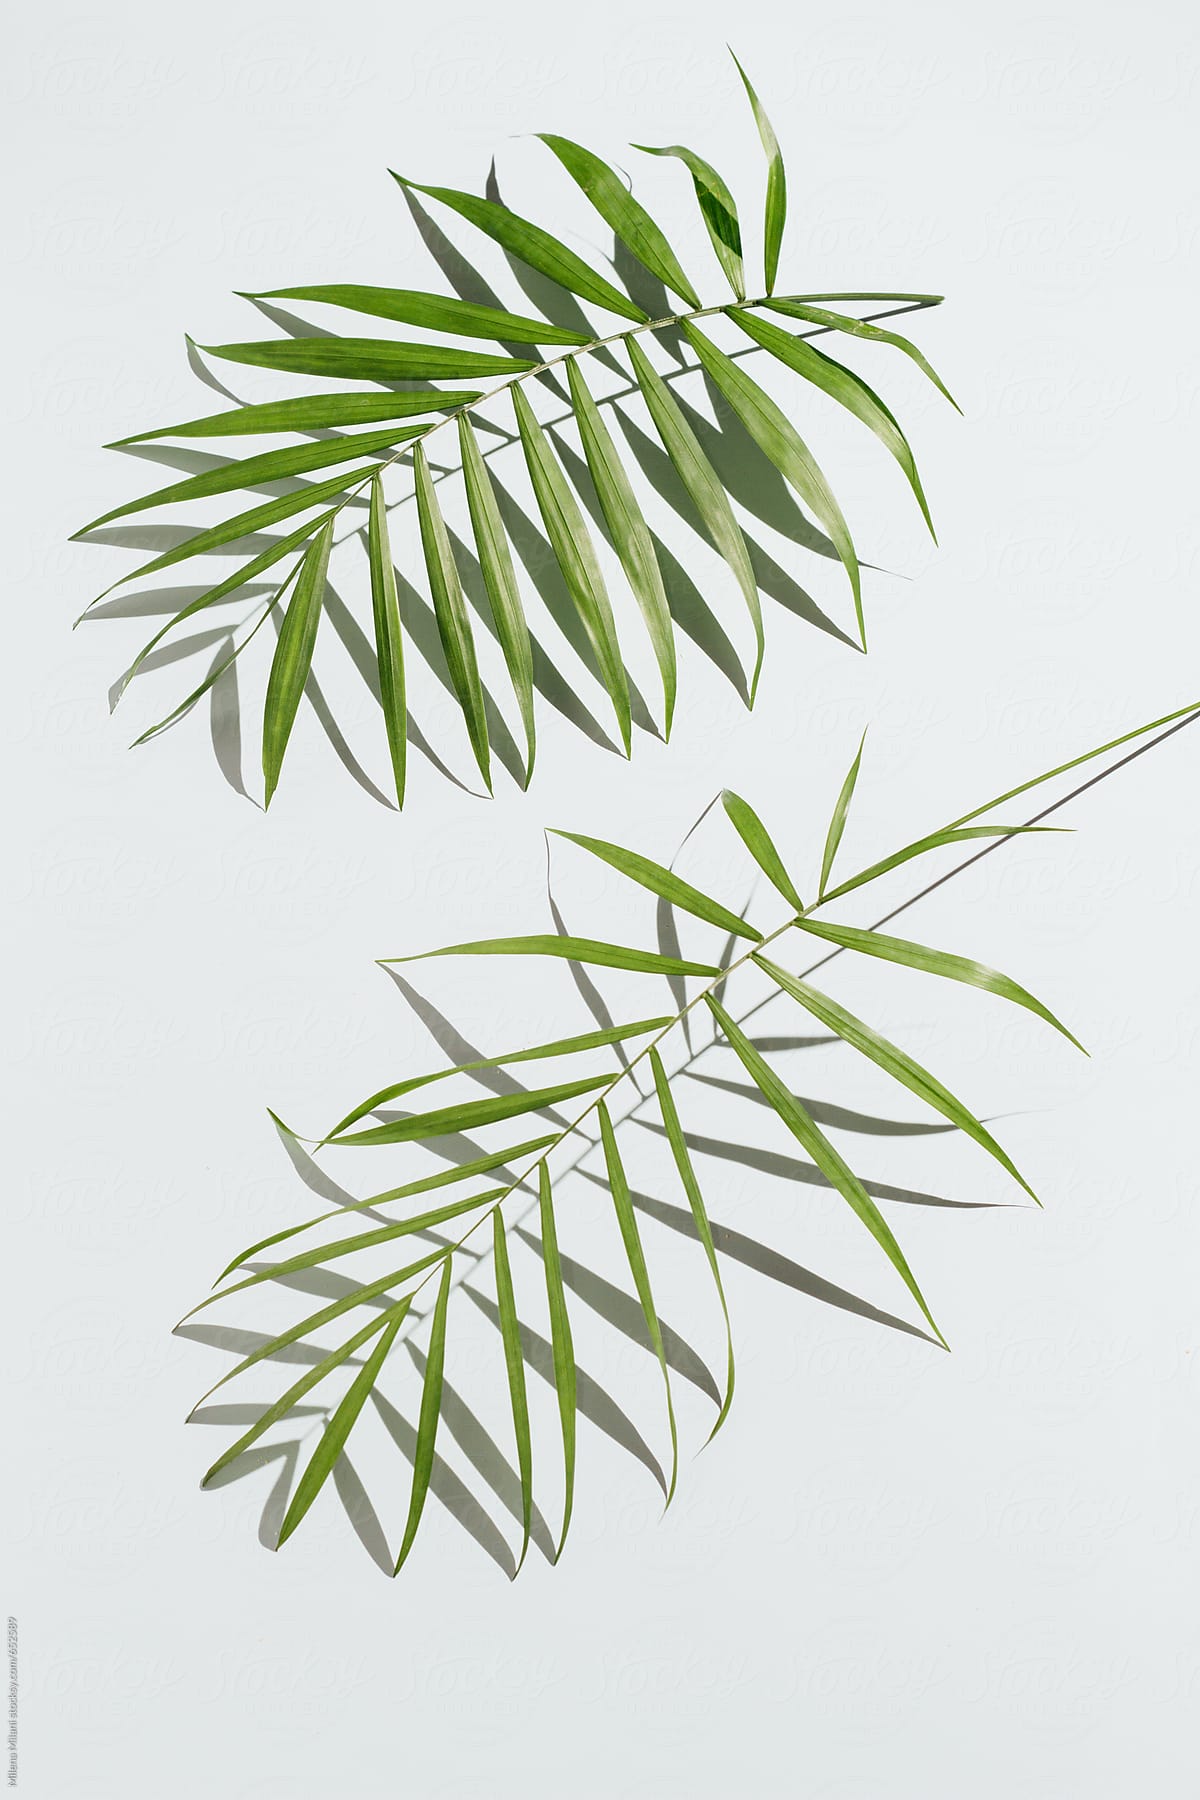 Palm leaves on a baby blue background